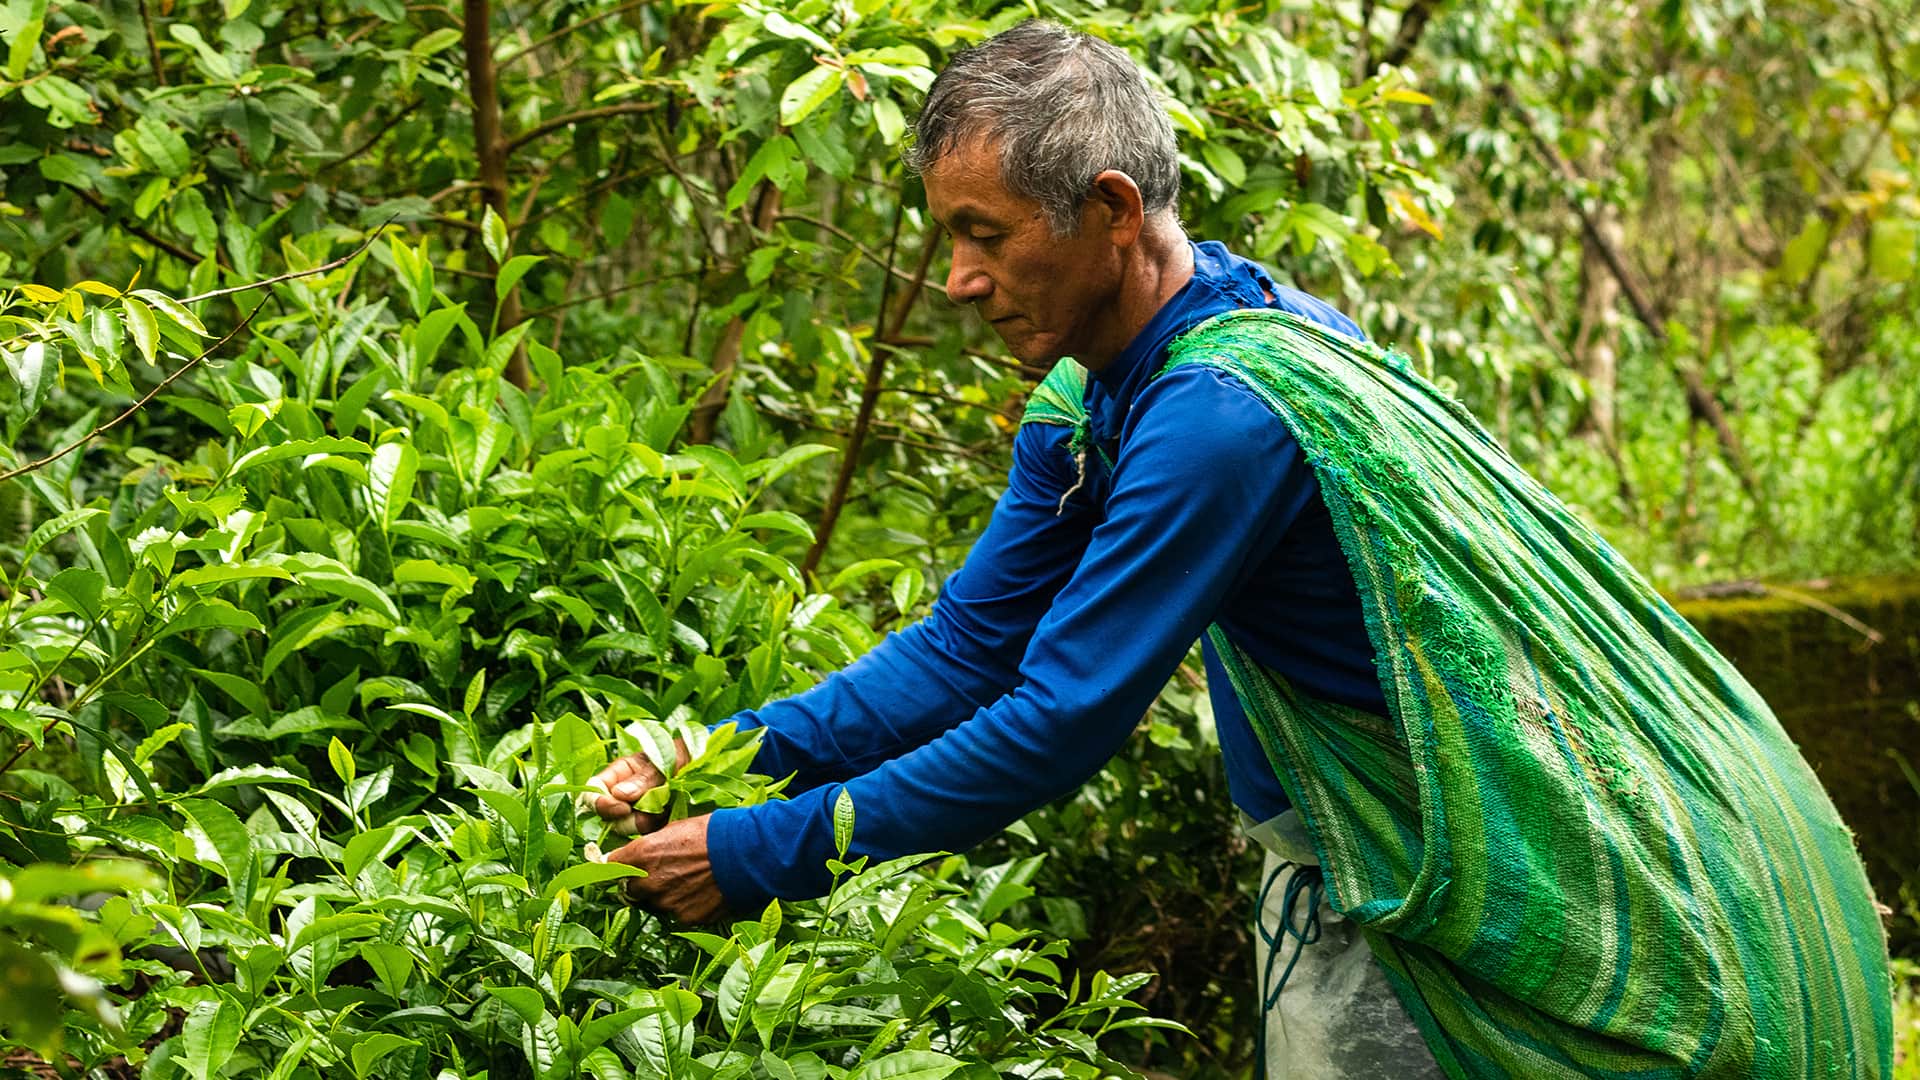 Man collecting tea leaves by hand and gathered in an traditional way